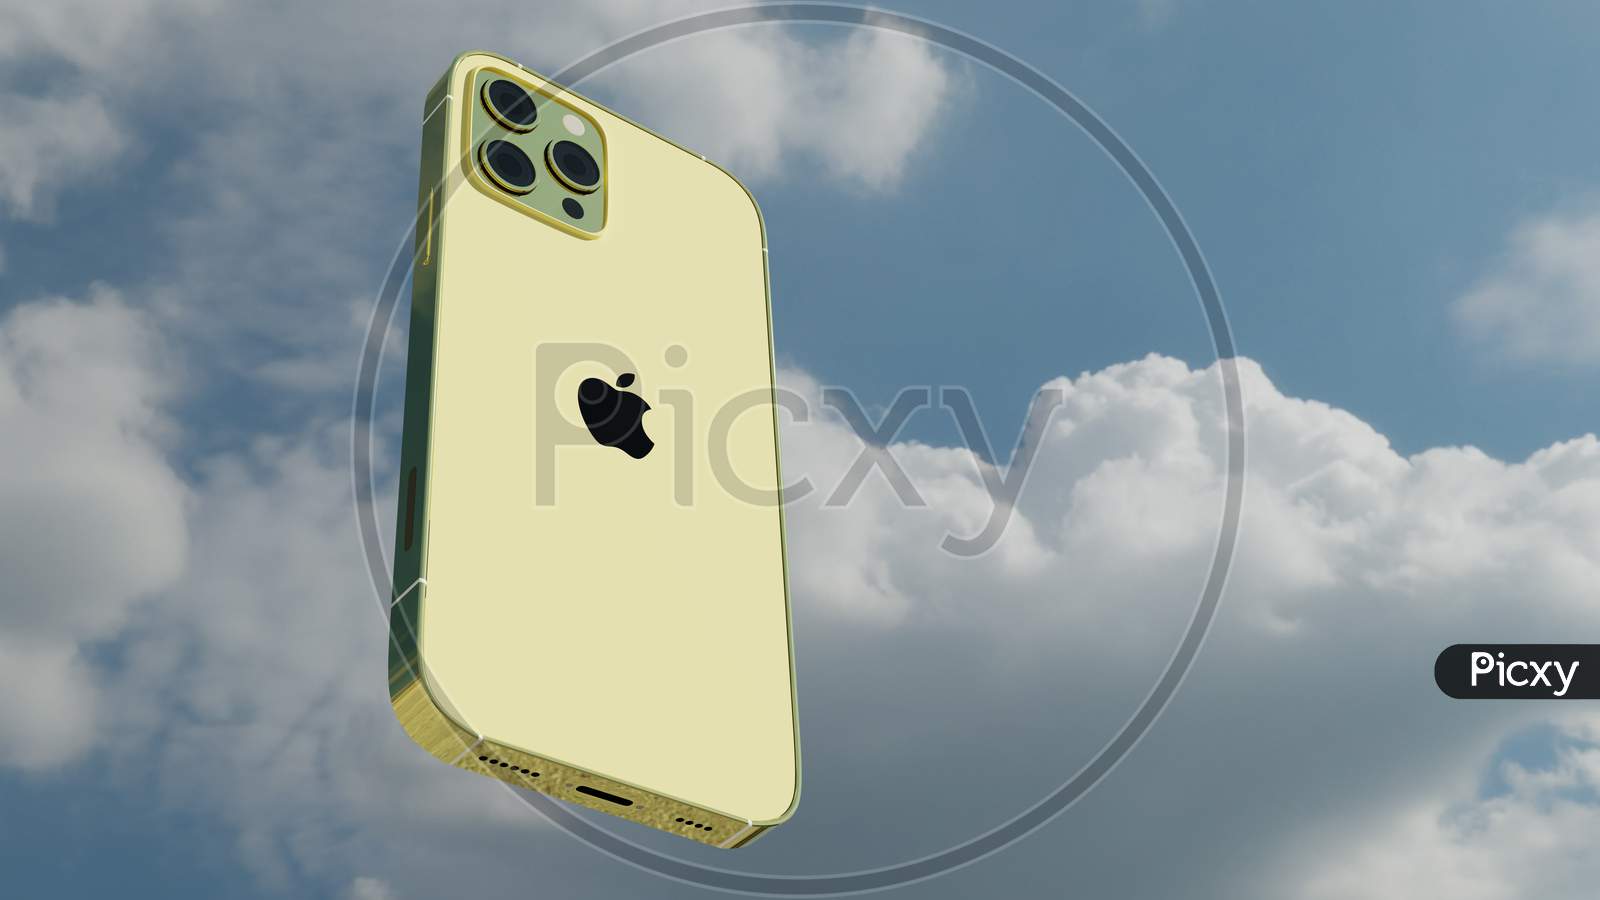 3D Rendering Of An Iphone 12 Pro Max Flying Against A Blue Sky With White Clouds